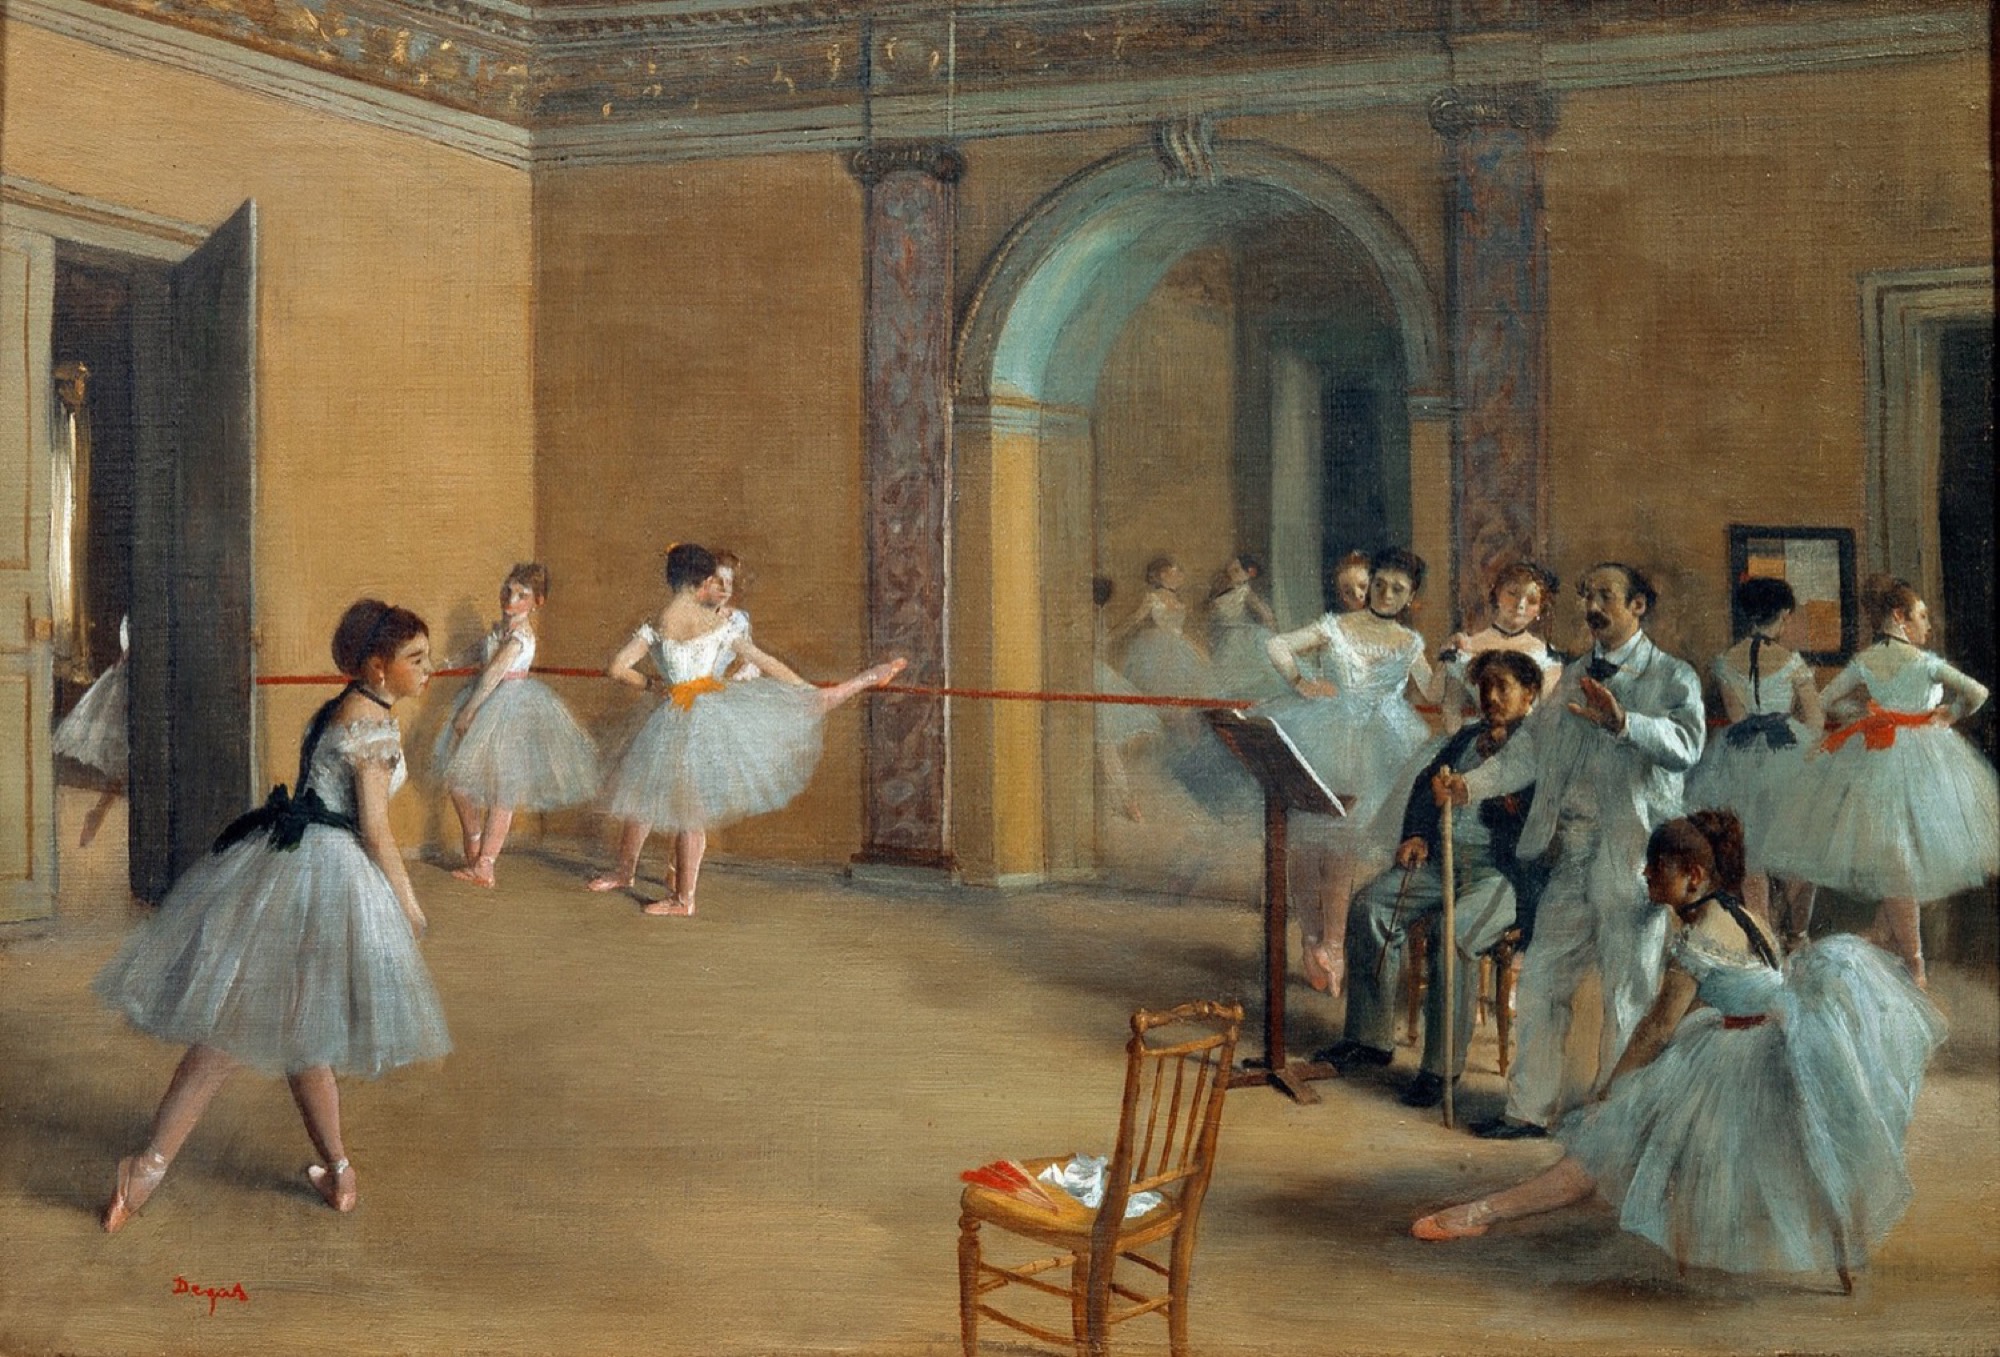 Edgar Degas, <em>The Dance Foyer at the Opera on the rue Le Peletier</em>, 1872, oil on canvs, Musée d’Orsay